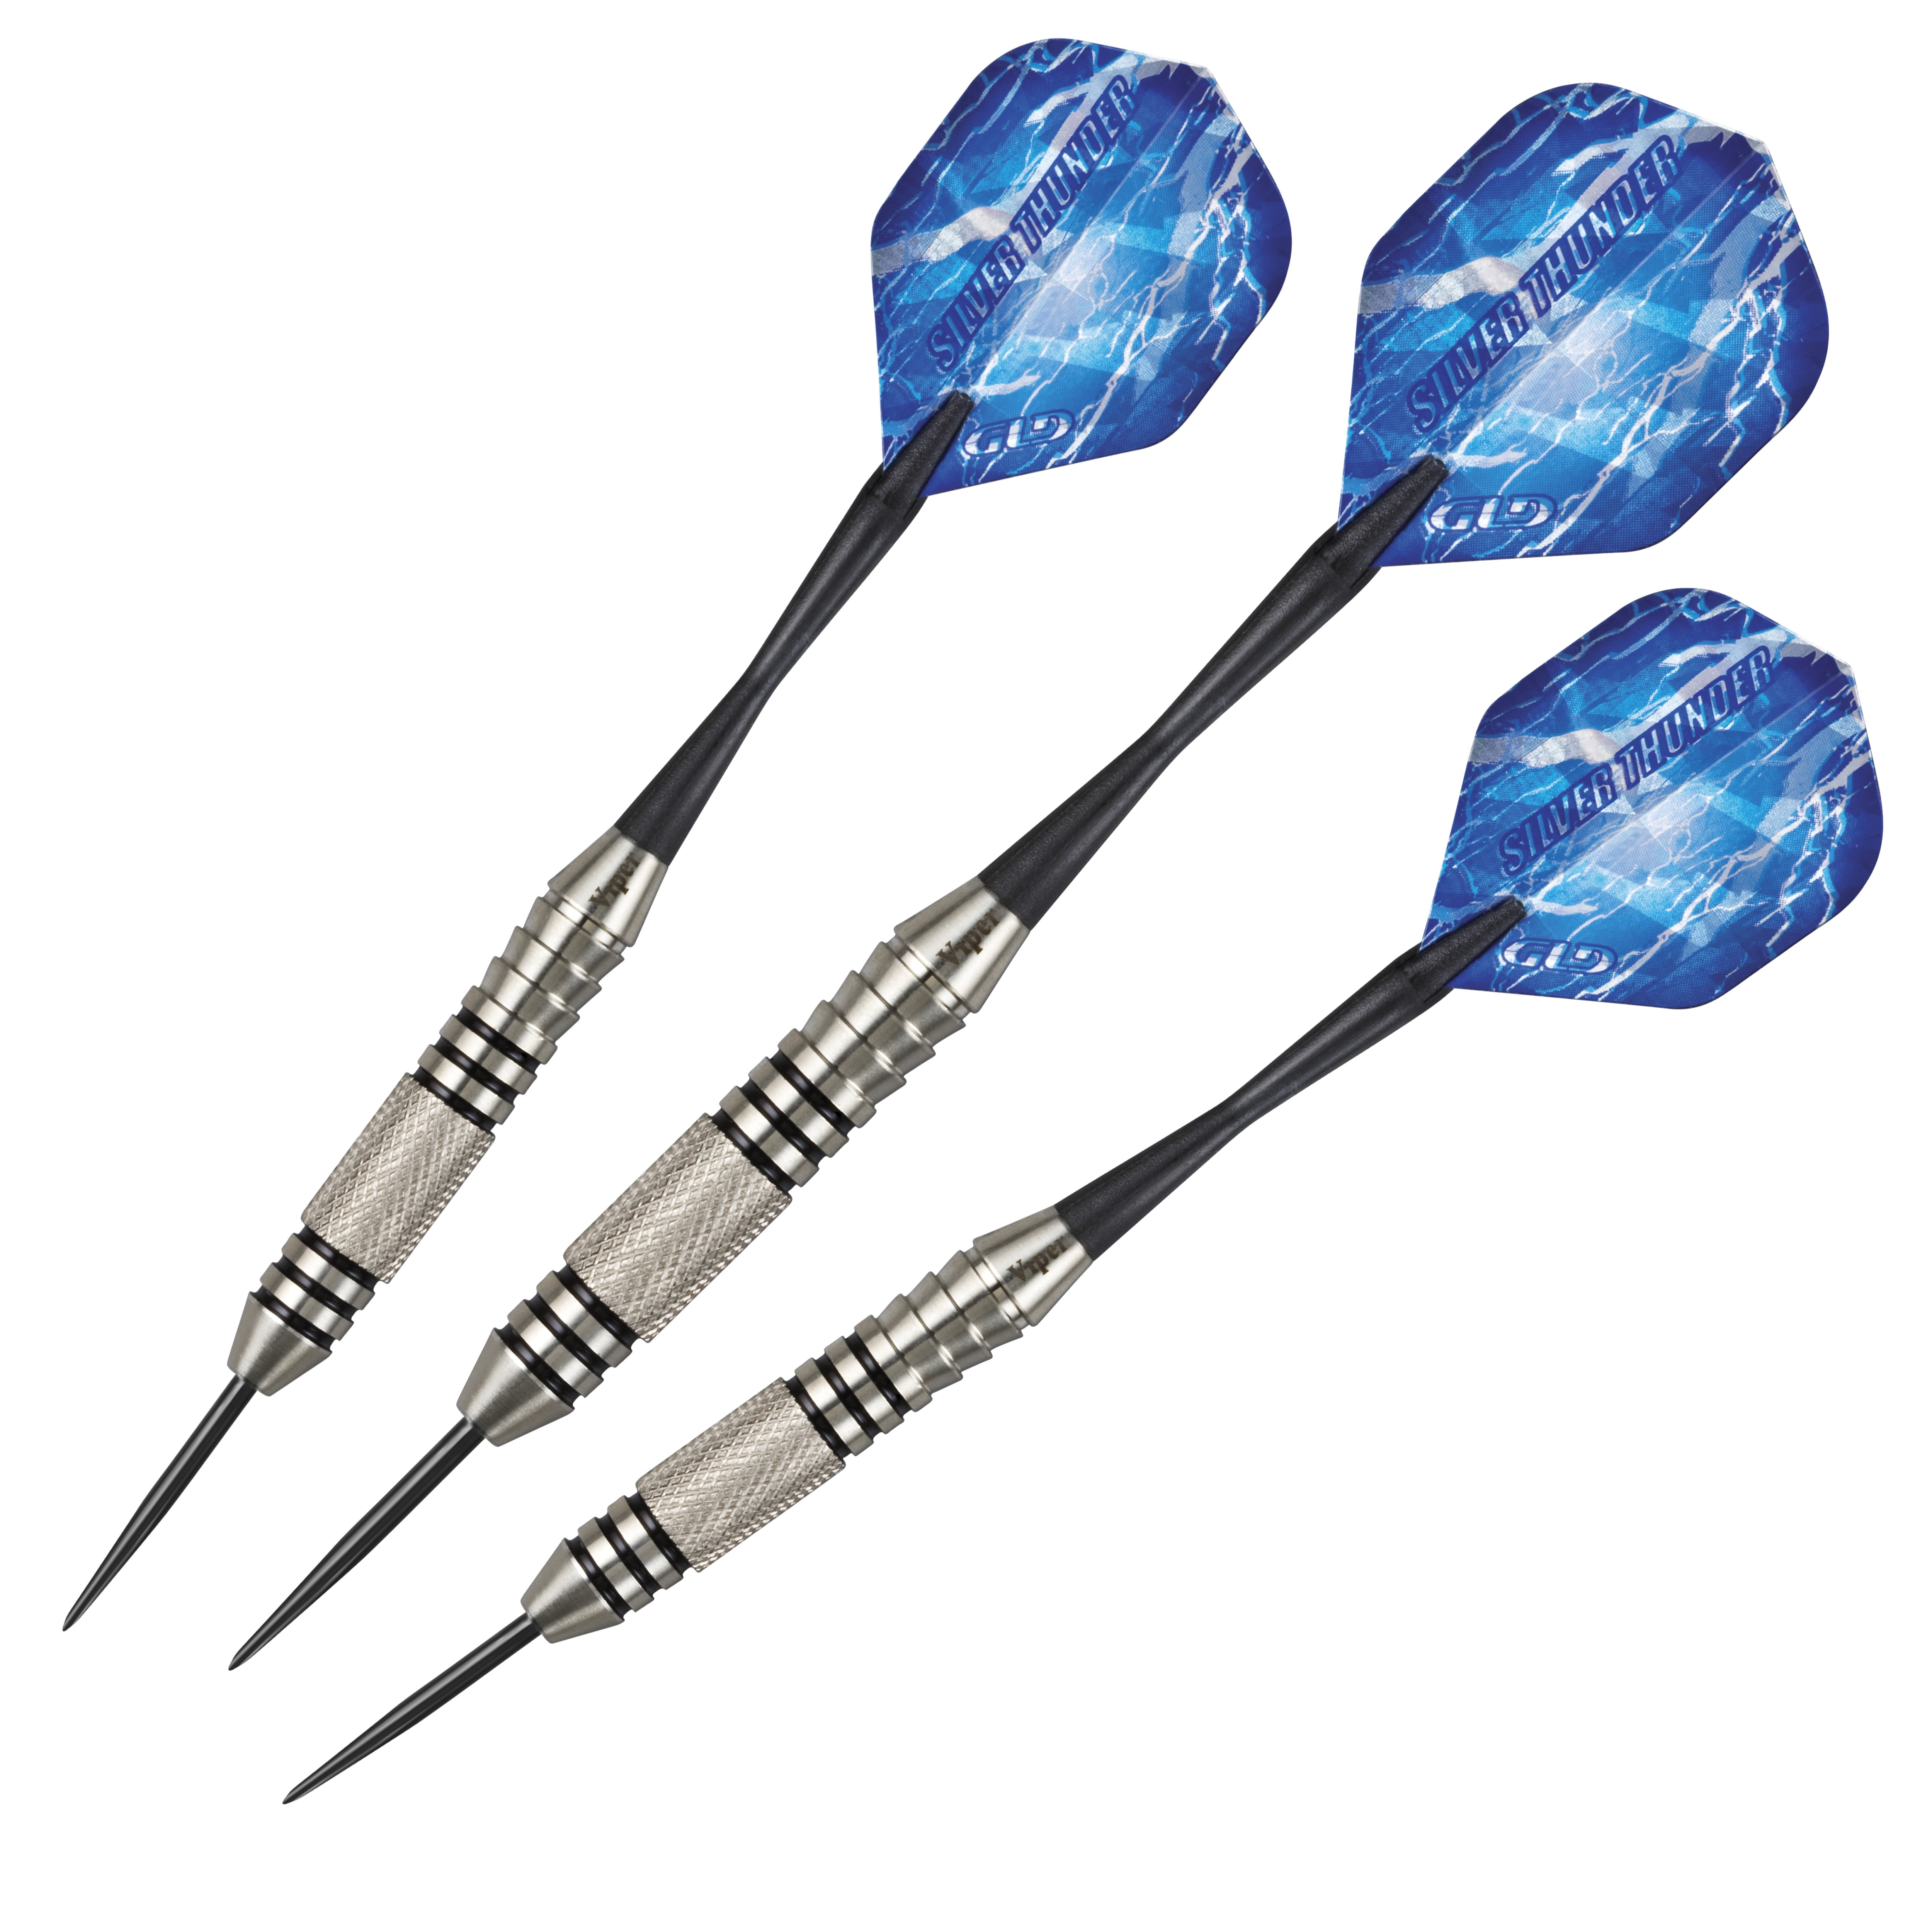 Metallic Dart Flights Polycarbonate Shafts NEW Soft Tips Details about   Lot of 5 ACCUDART 